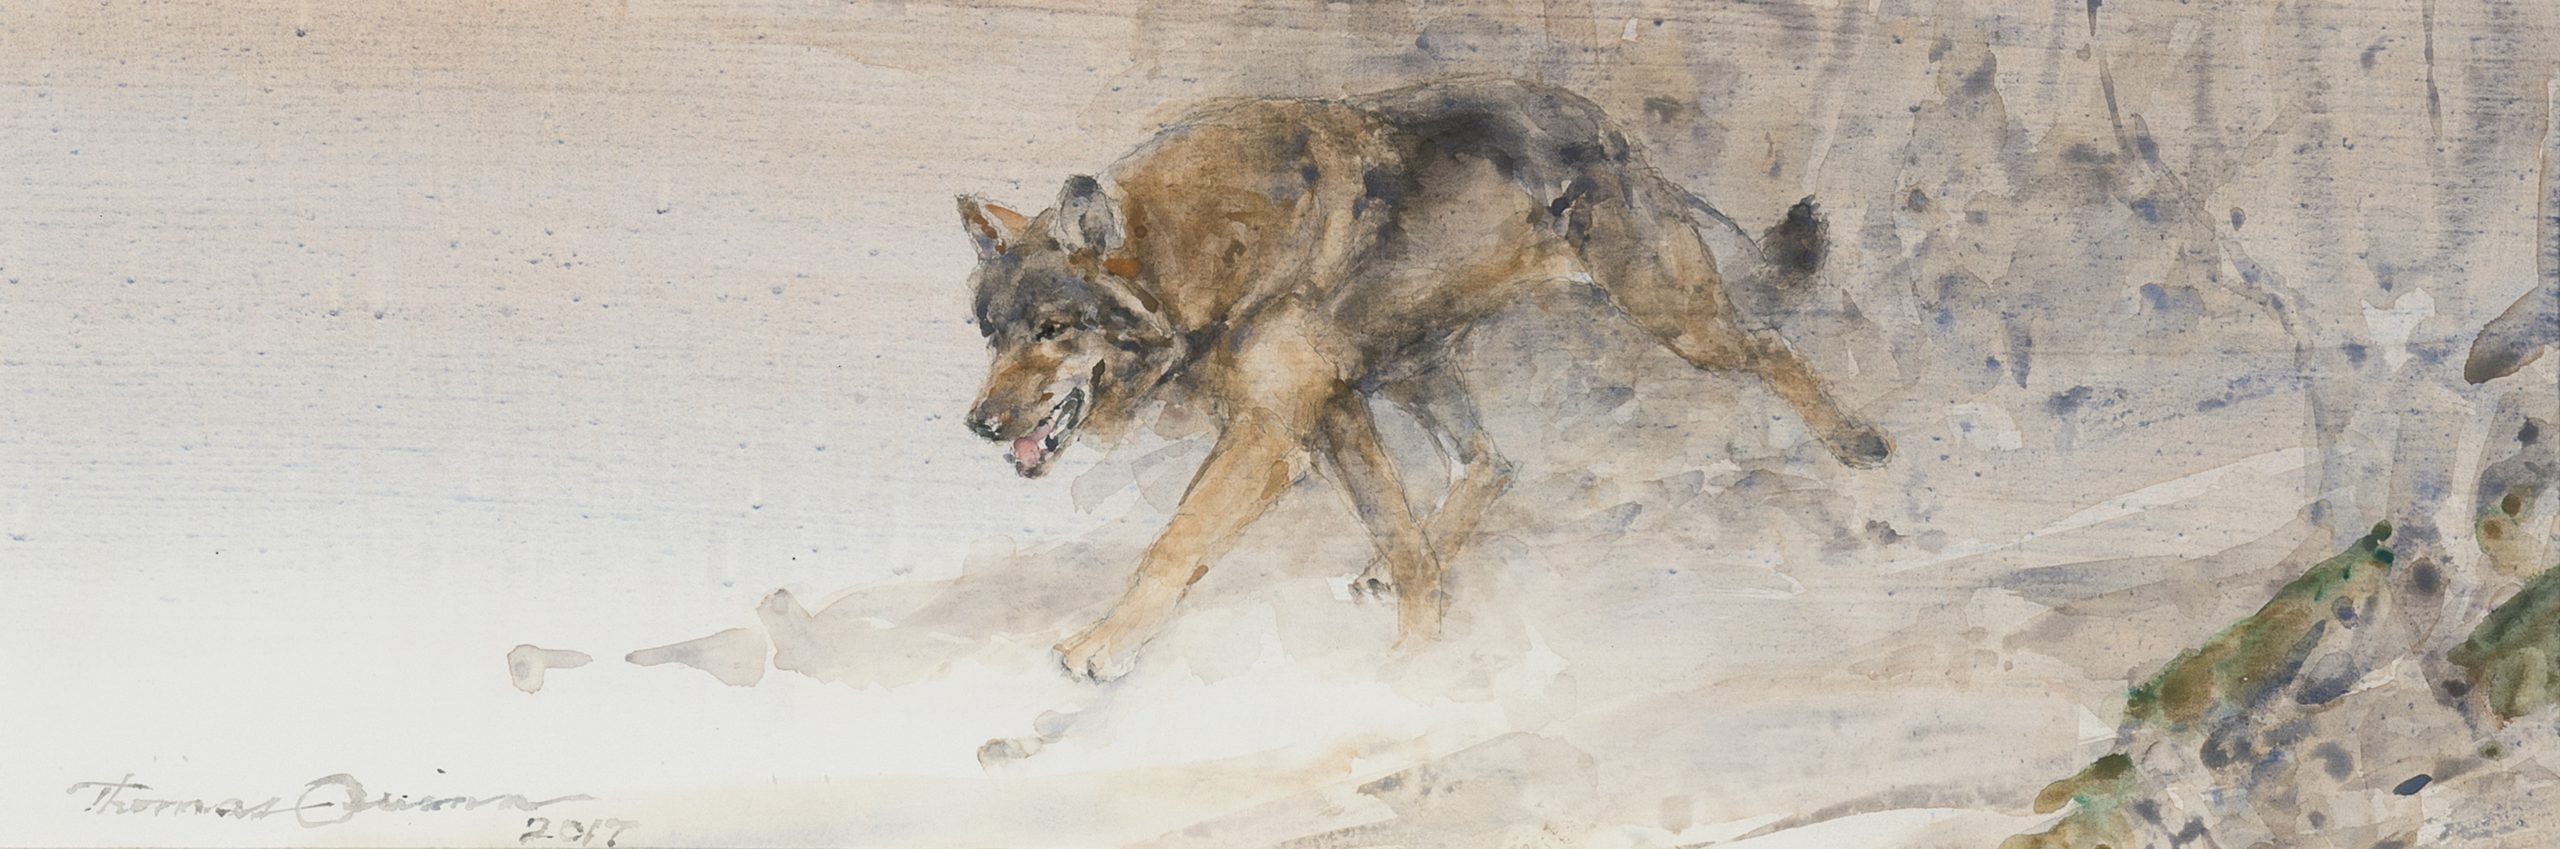 

											Tony Angell, Thomas Quinn</b>

											<em>
												Tony Angell and Thomas Quinn:  A Conversation with Nature</em> 

											<h4>
												September 25 - November 28, 2020											</h4>

		                																																<i>Wolf Trot,</i>  
																																																					watercolor on paper, 
																																								 5 7/8 x 17 3/4 inches 
																								
		                				